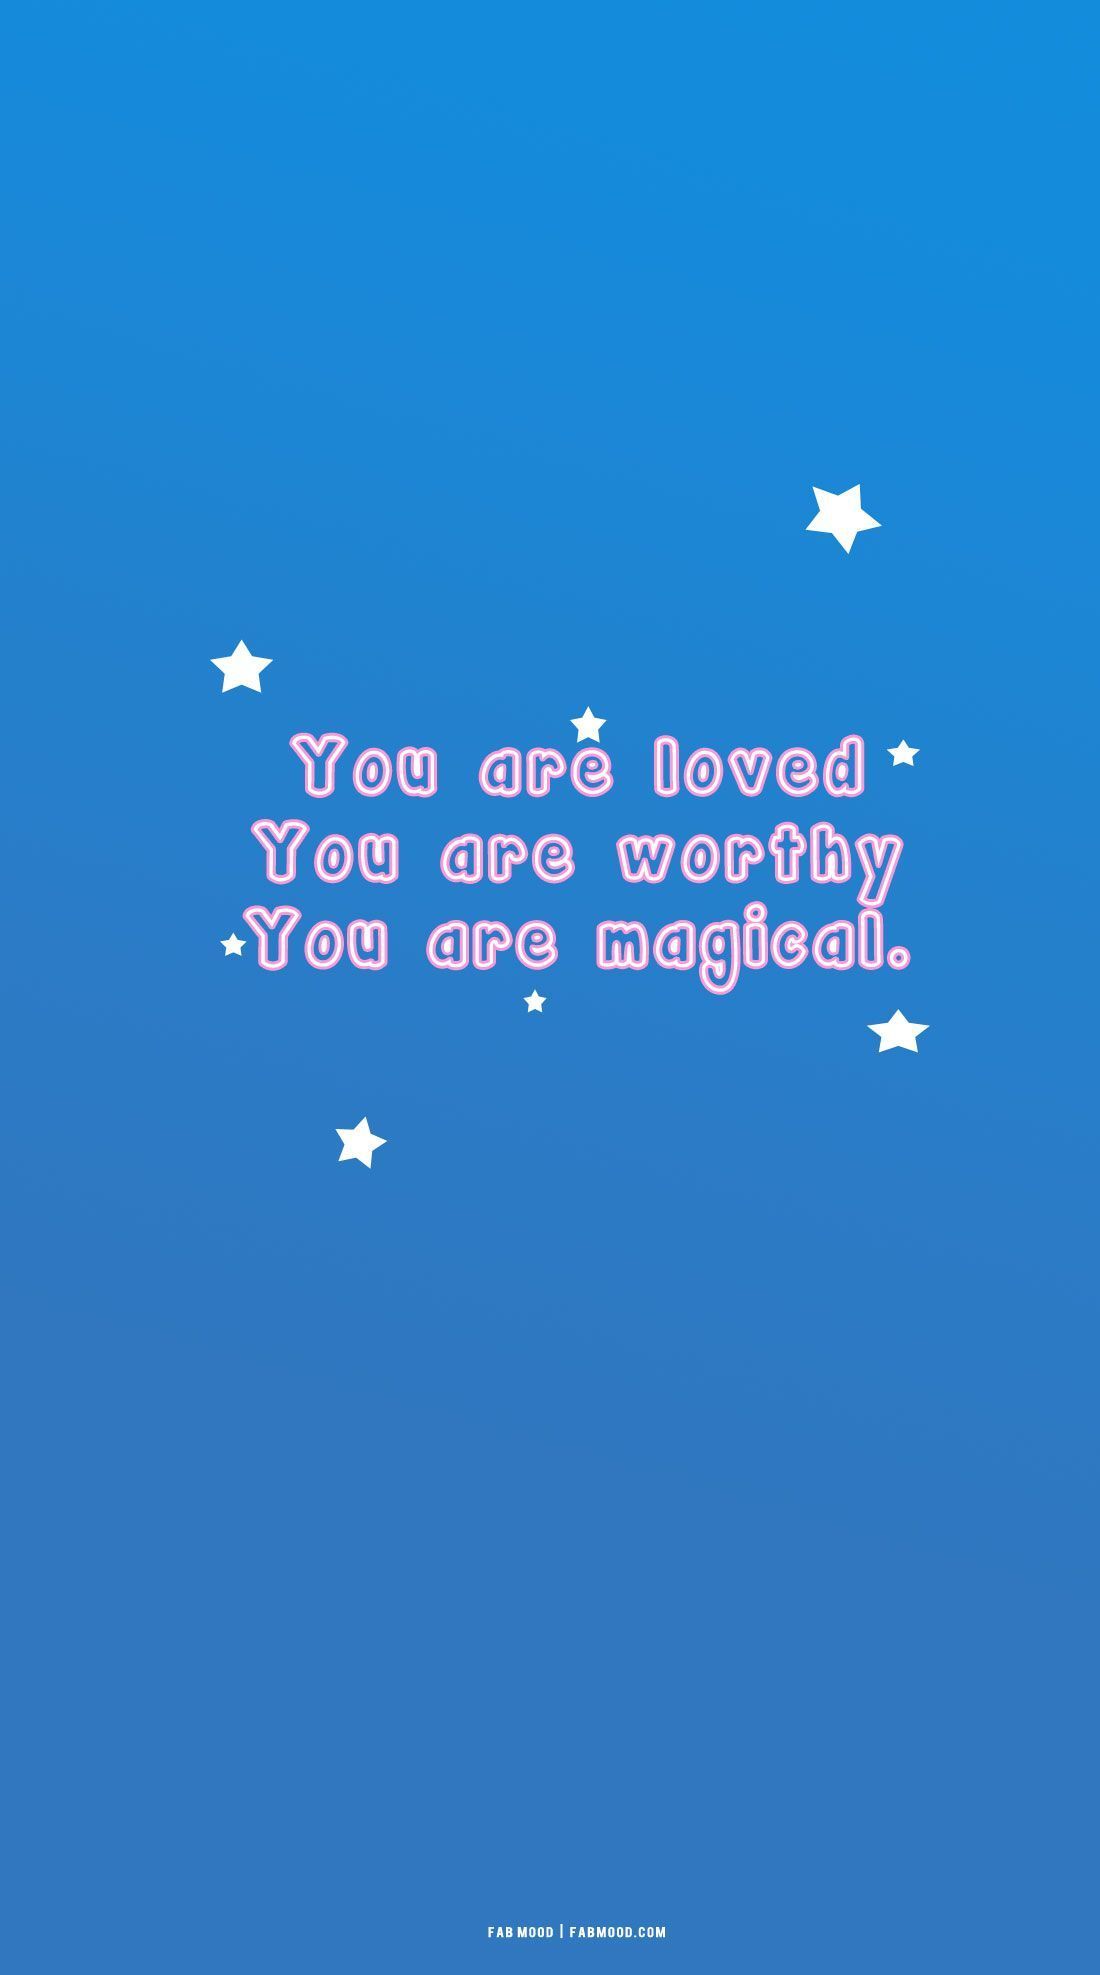 You are loved and magical - wallpaper - Blue, phone, November, love, magic, couple, pretty, cute iPhone